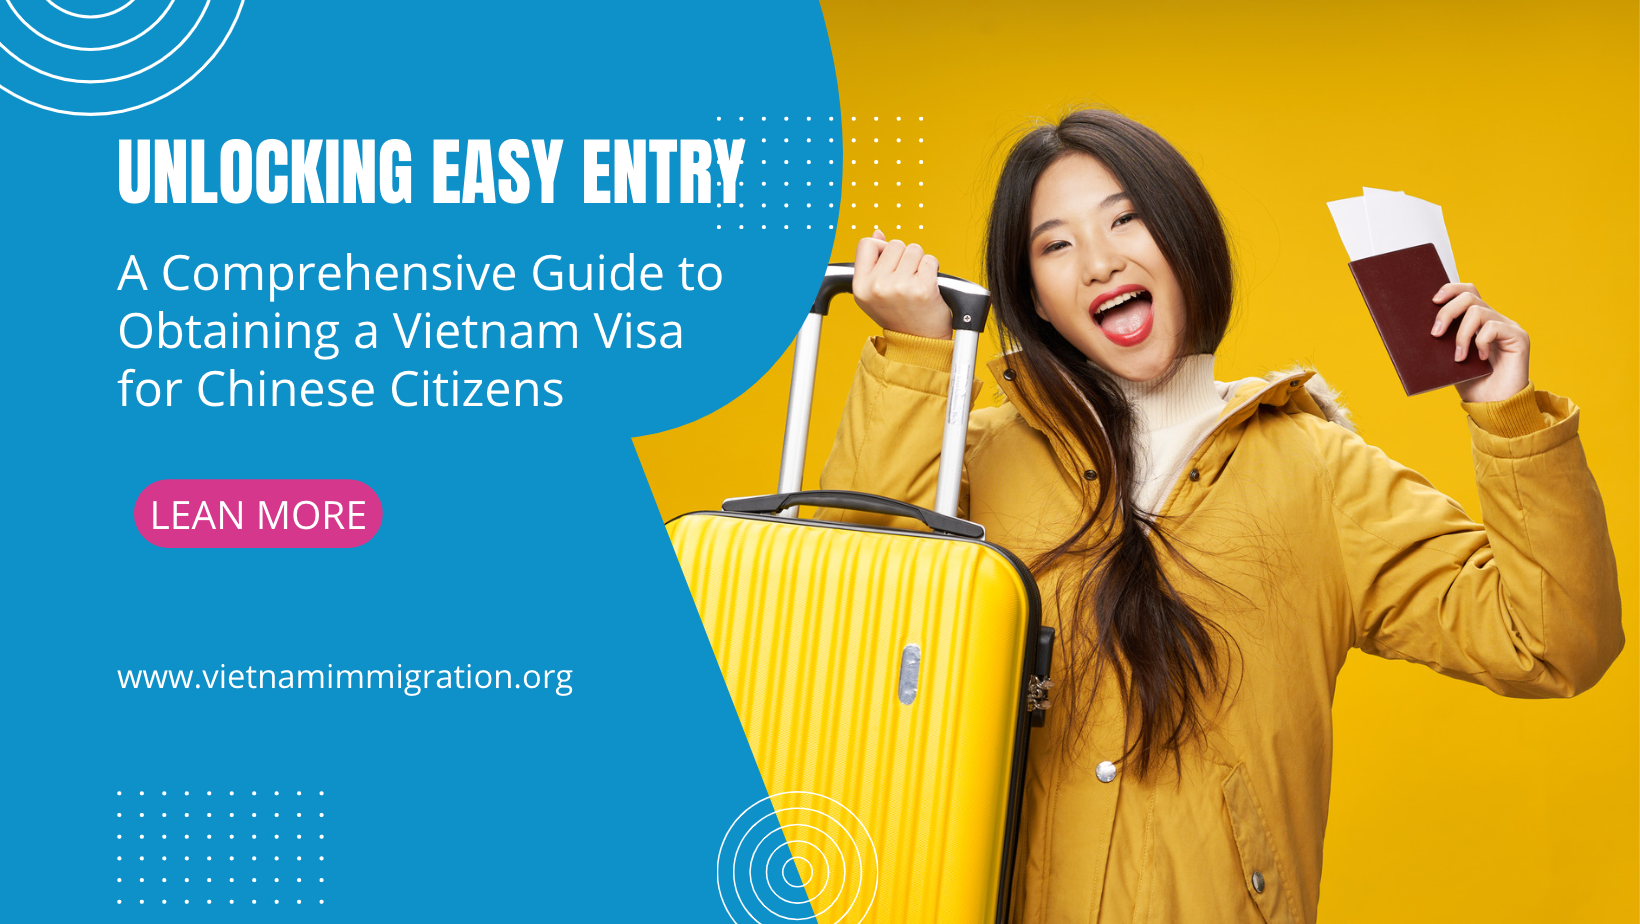 Unlocking Easy Entry: A Comprehensive Guide to Obtaining a Vietnam Visa for Chinese Citizens